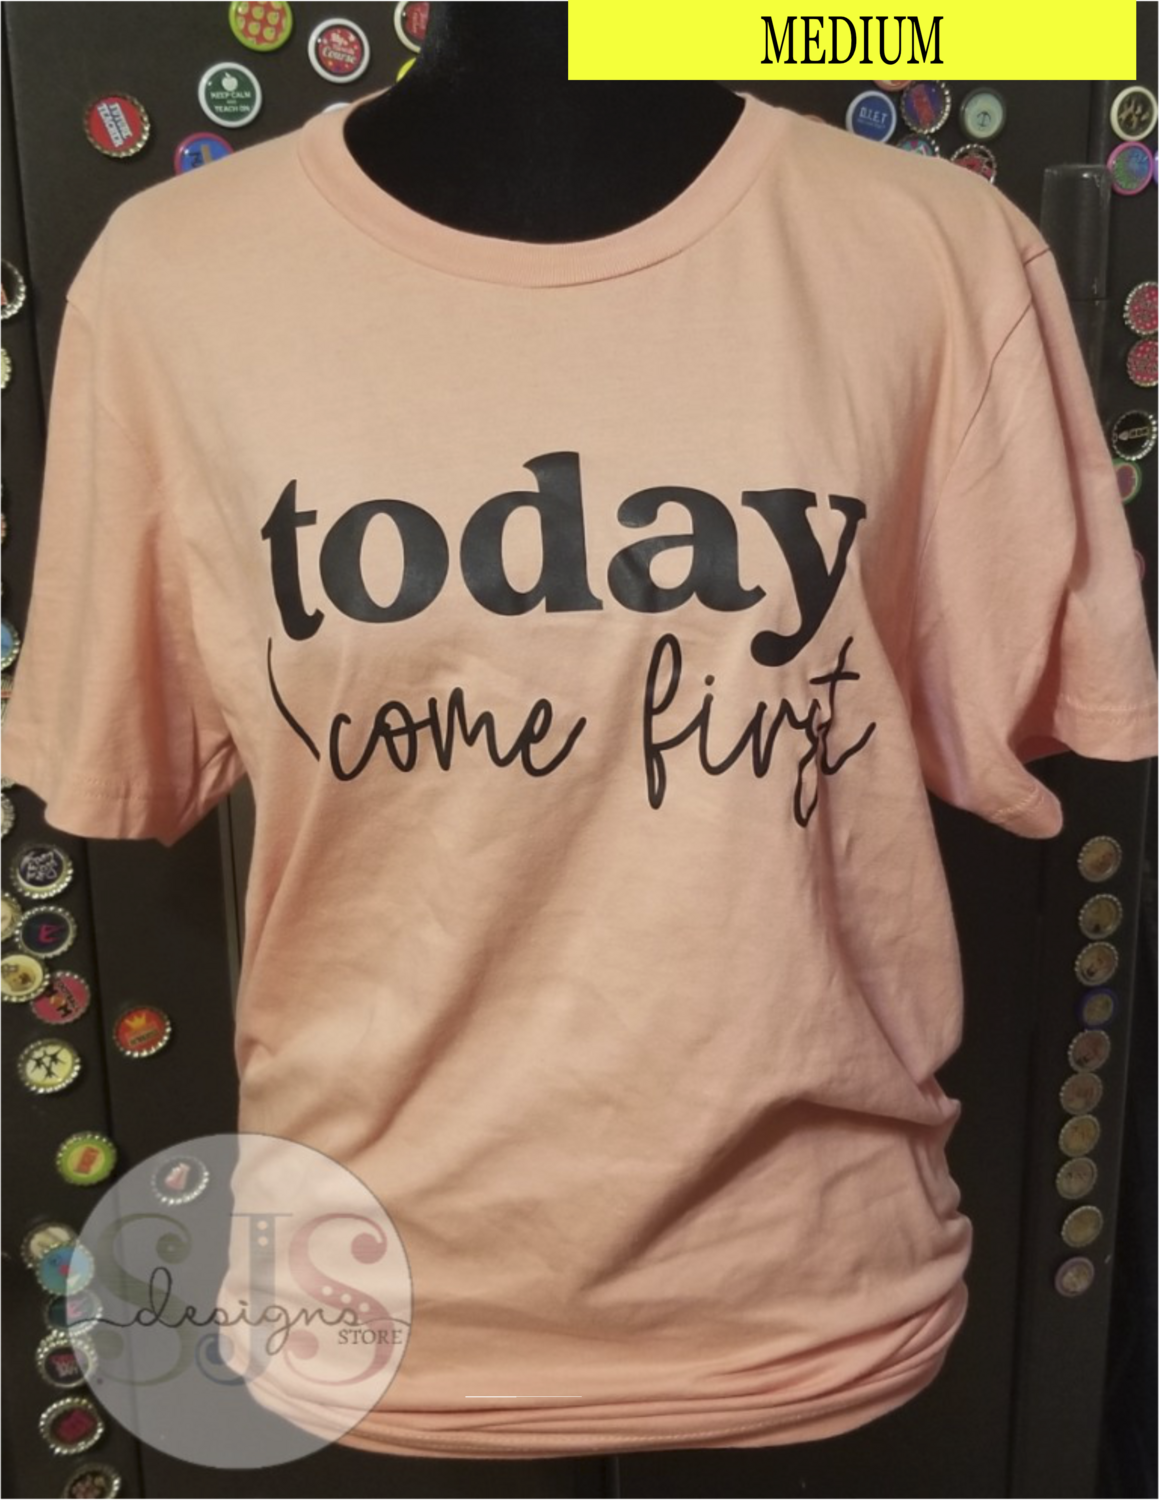 Today I Come First Shirt - Medium RTS